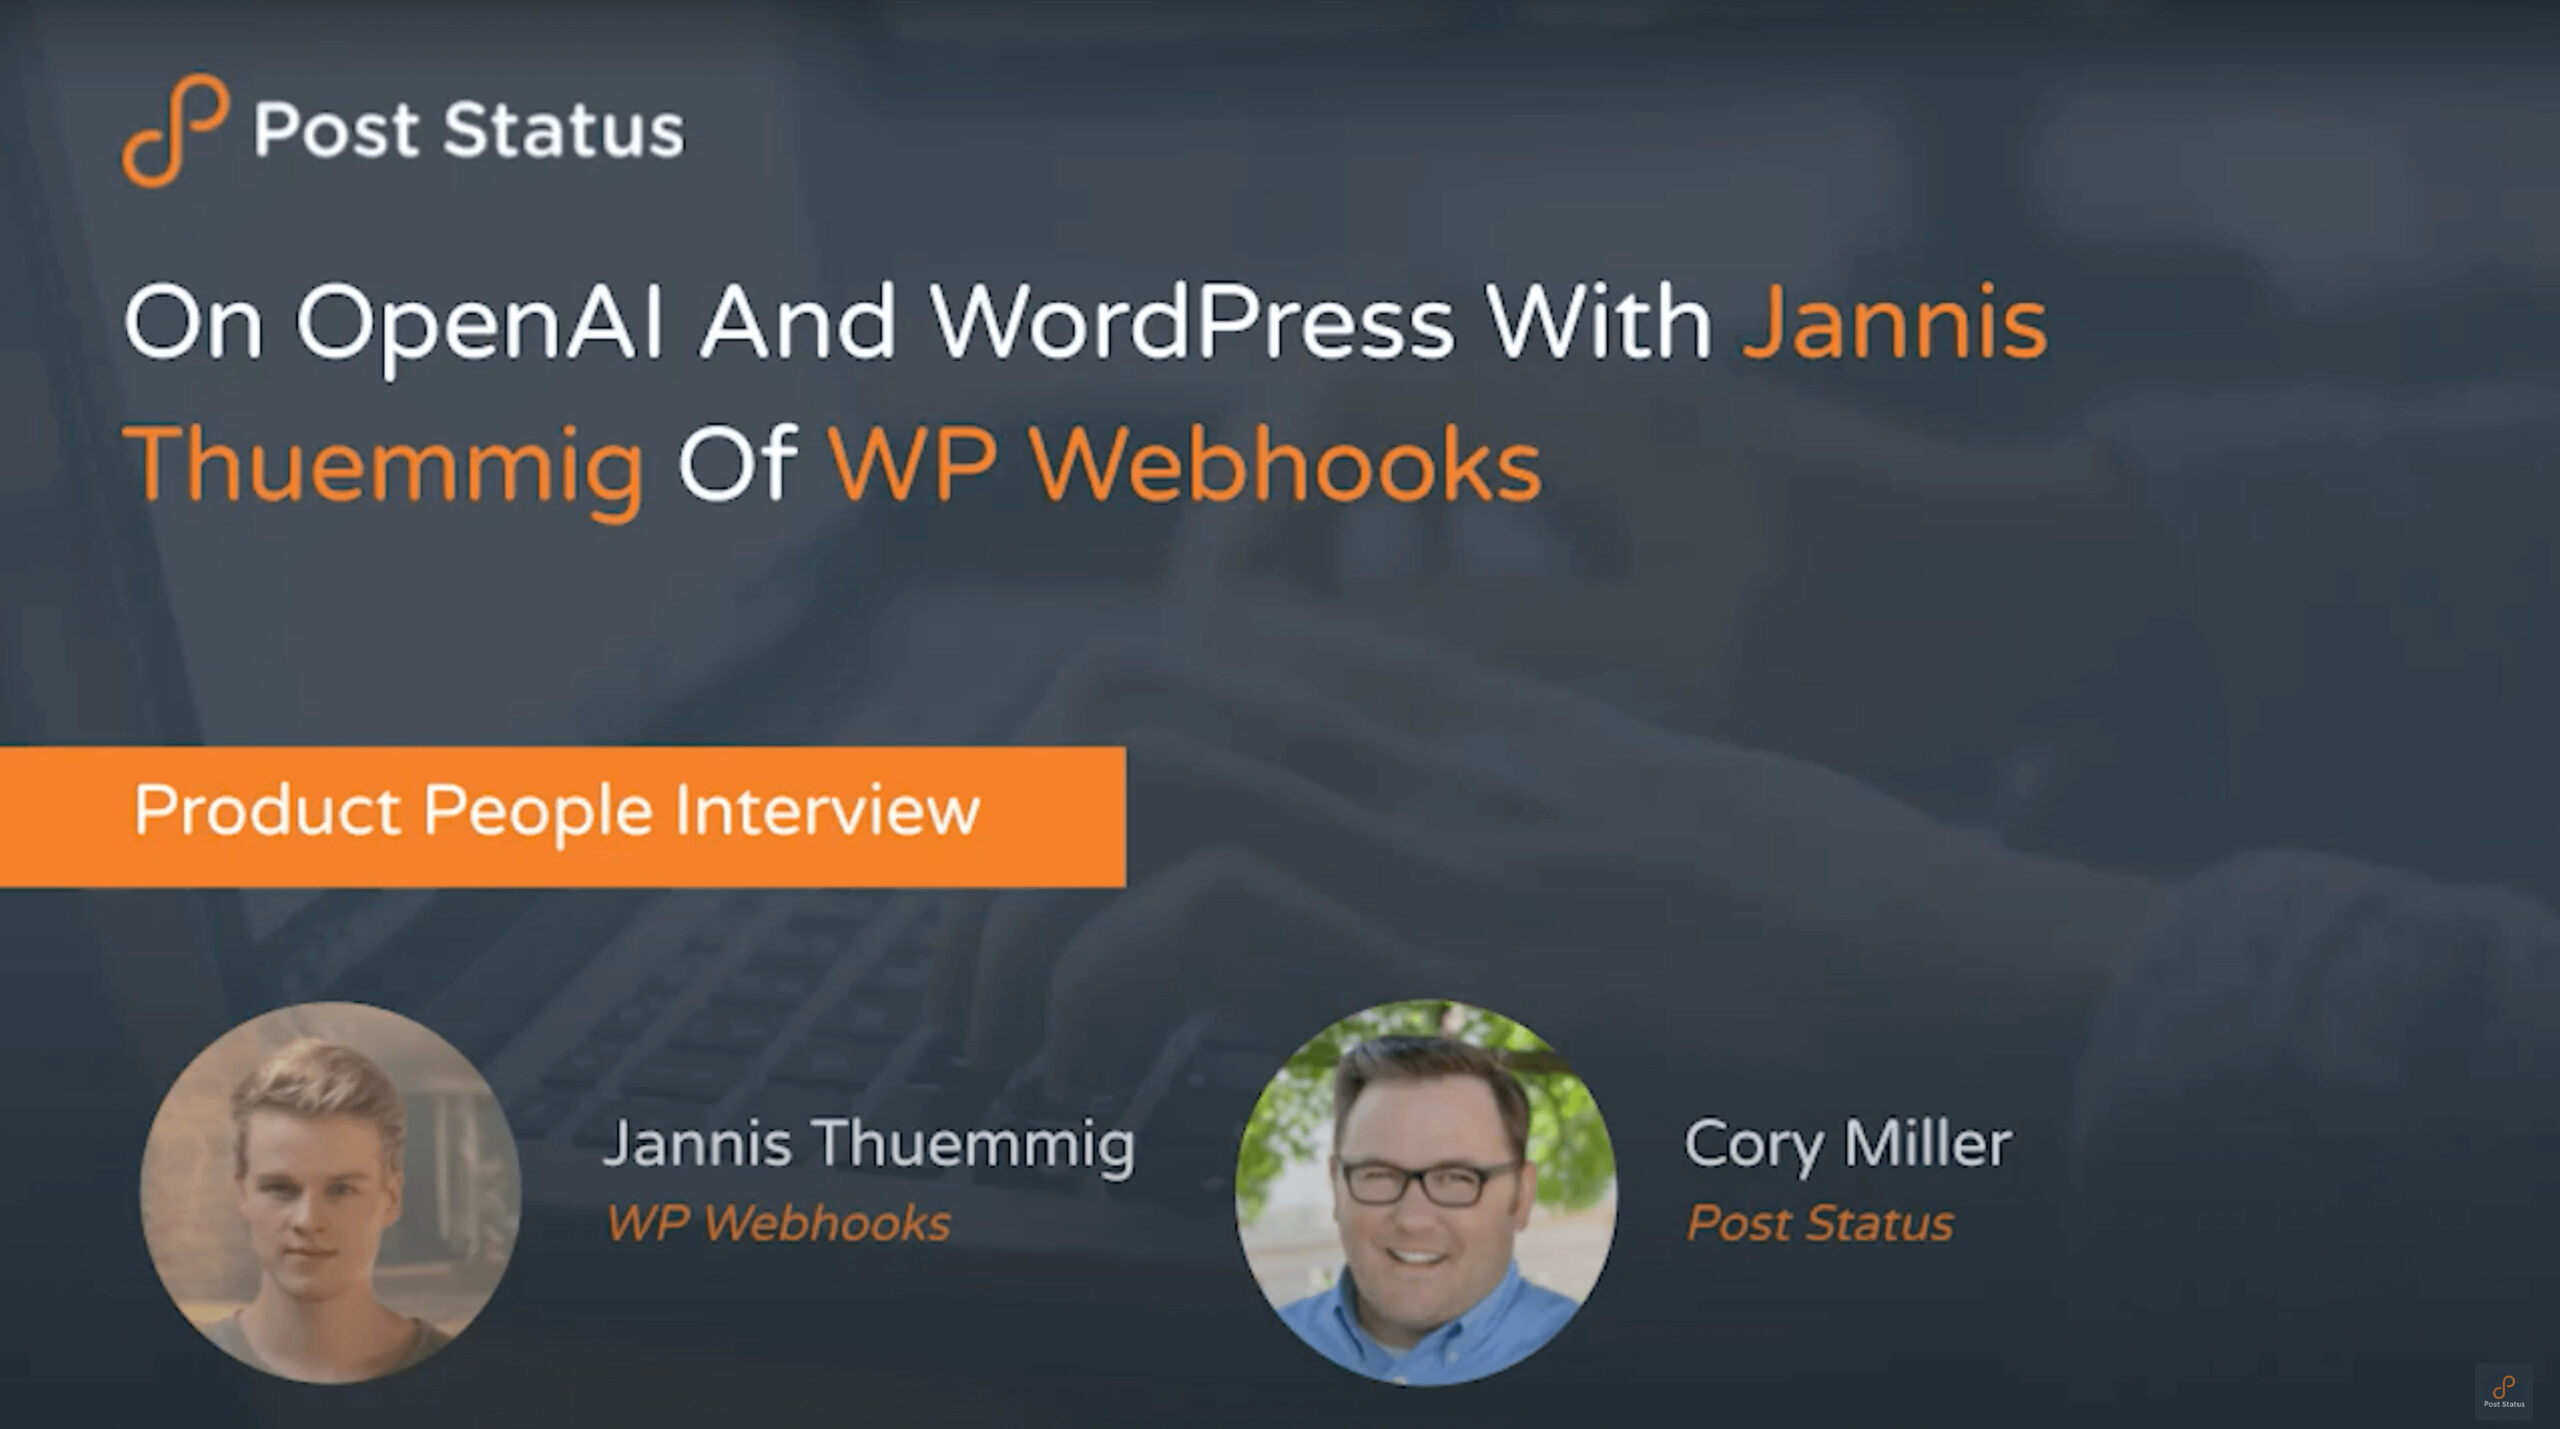 "Open AI and WordPress with Jannis Thuemmig of WP Webhooks; Product People Interview hosted by Cory Miller"